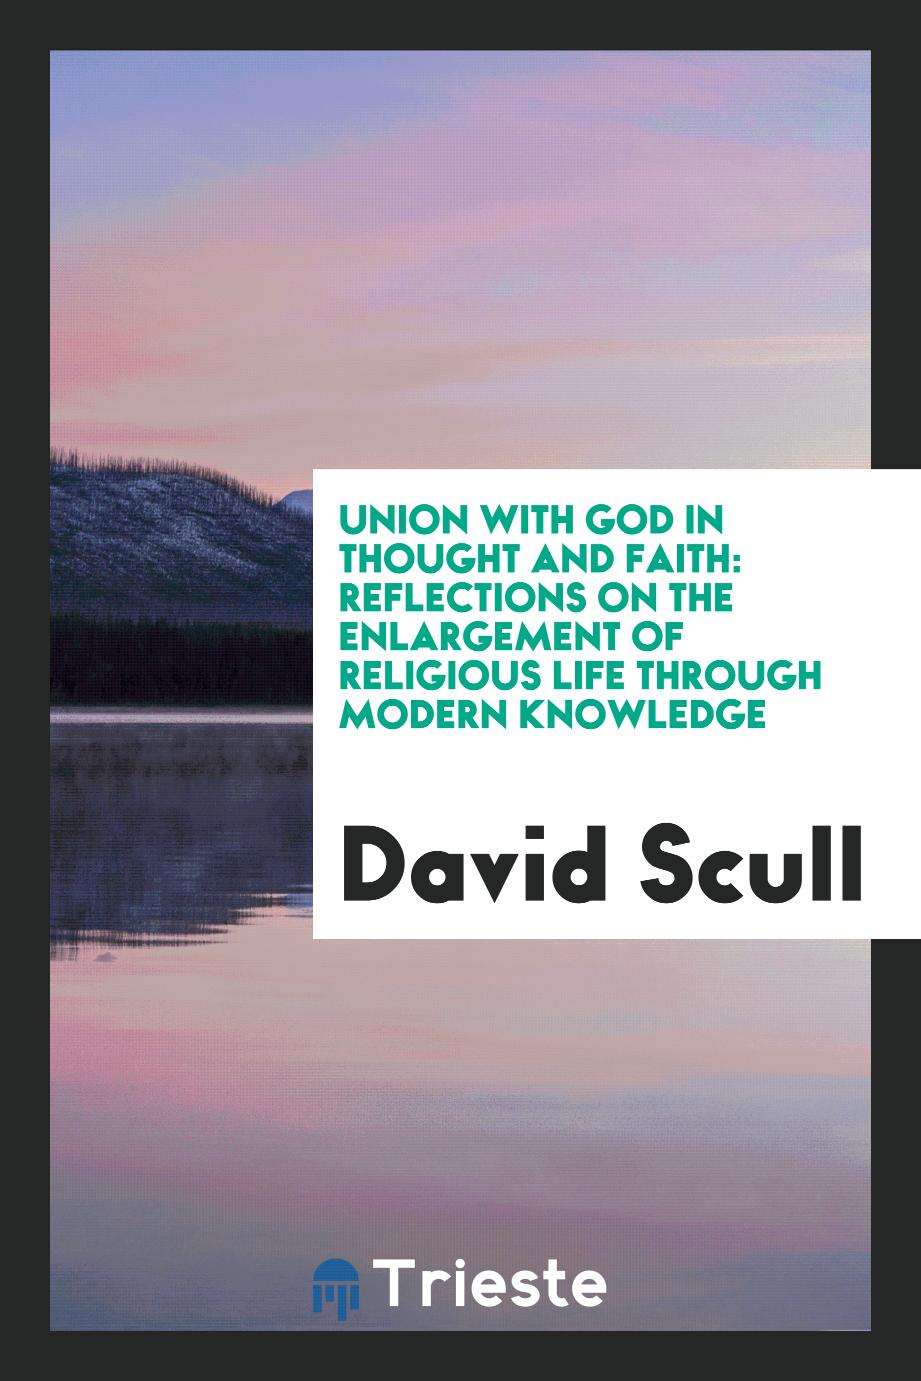 Union with God in Thought and Faith: Reflections on the Enlargement of Religious Life Through Modern Knowledge